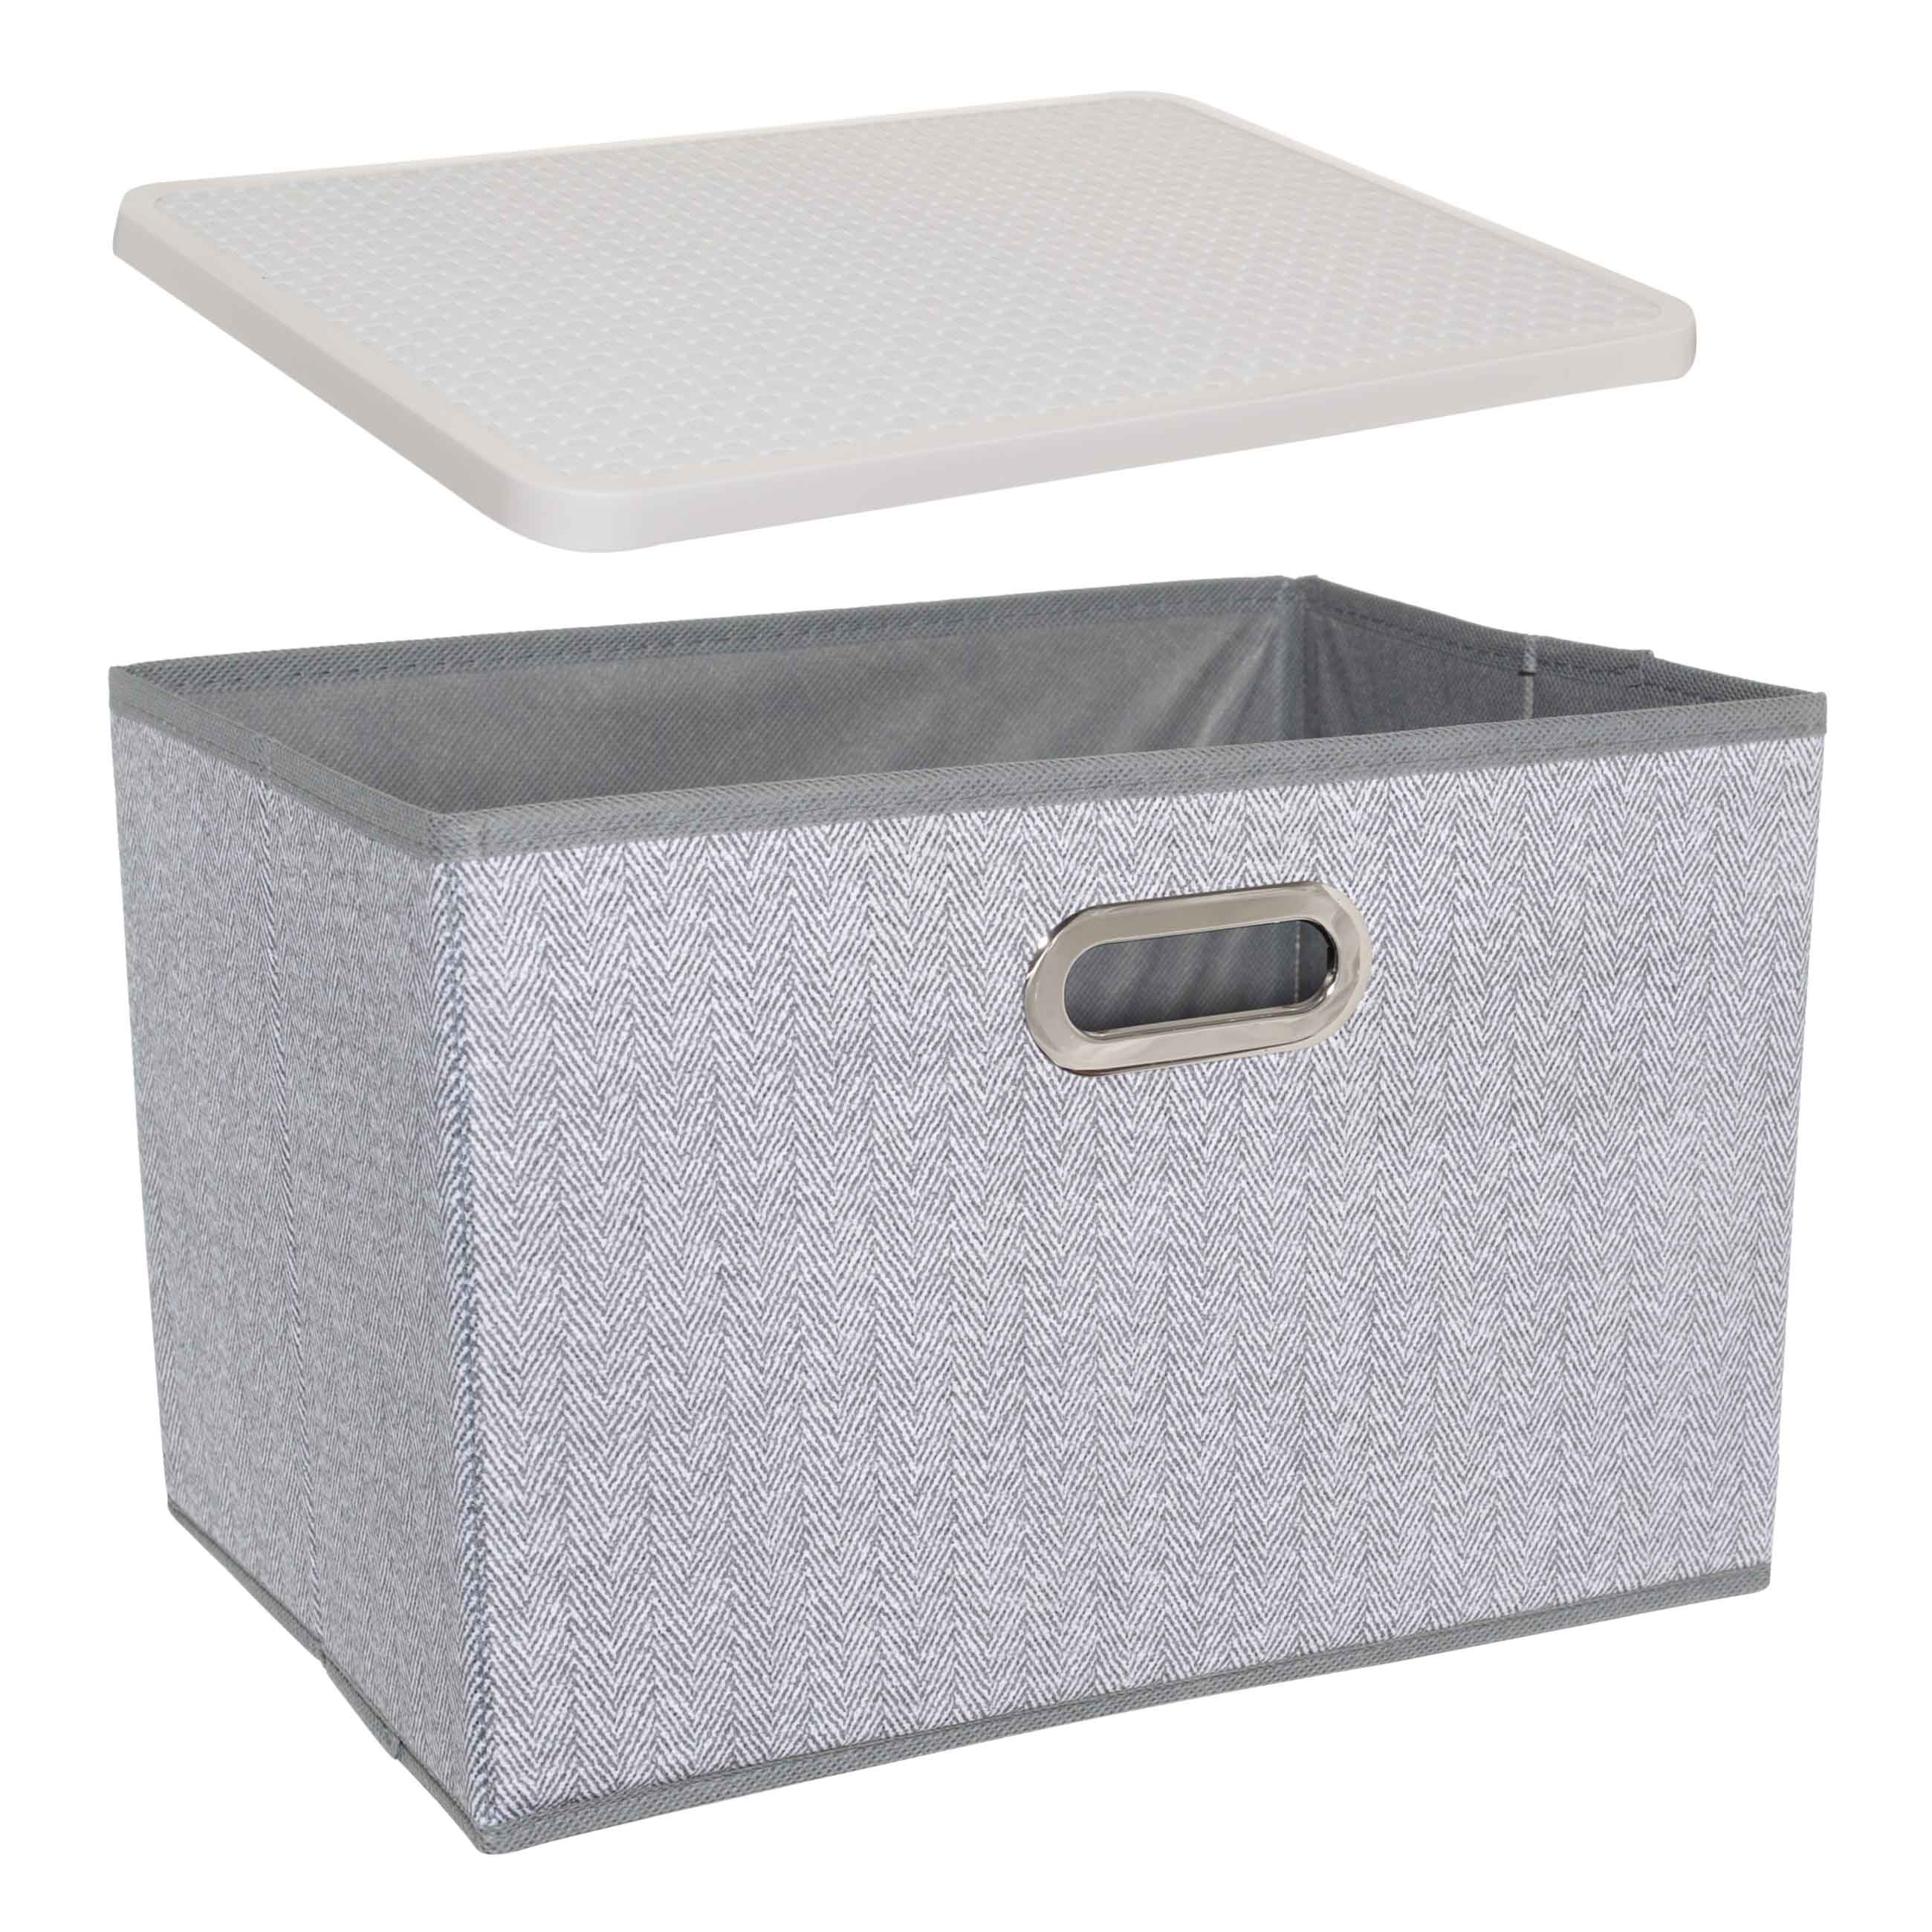 Organizer-box for things, 38x26 cm, with handles/lid, textile / plastic, gray, Pedant new изображение № 3